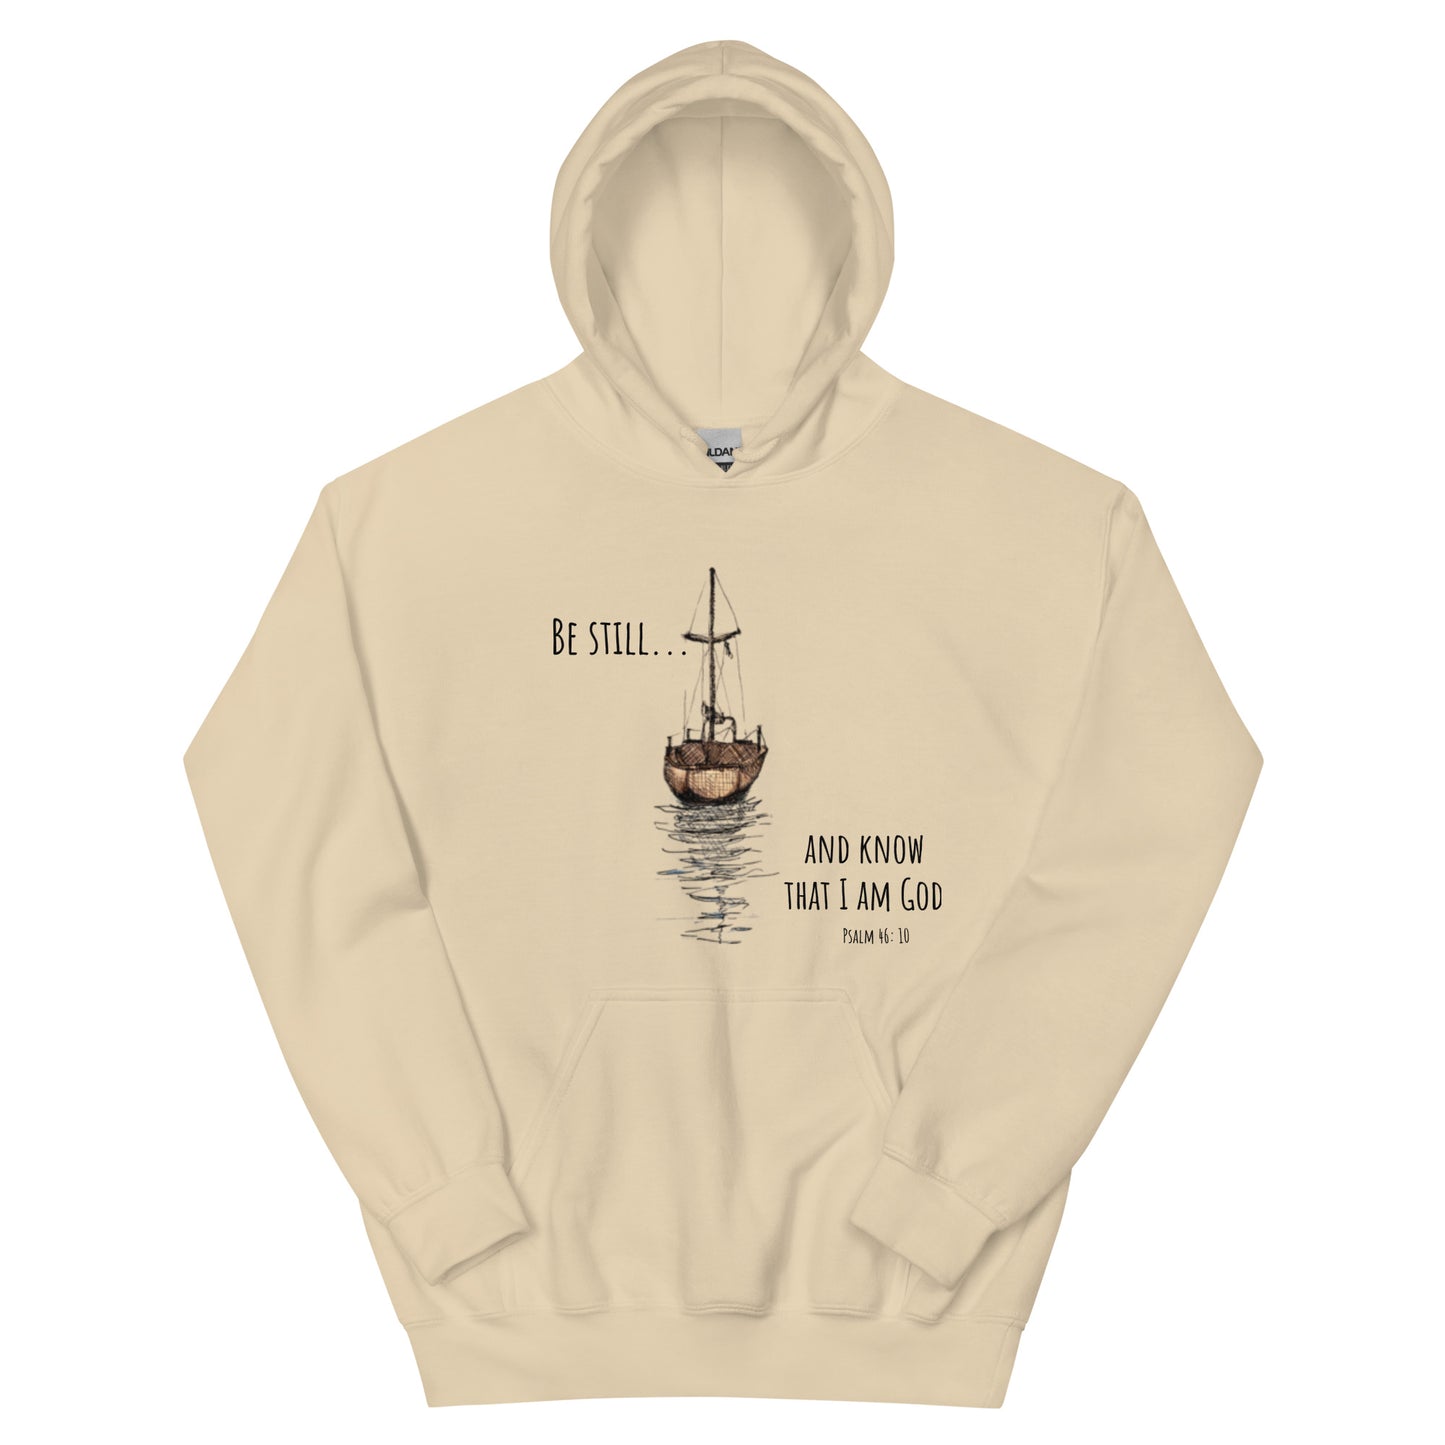 Be still and know that I am God-Unisex Hoodie